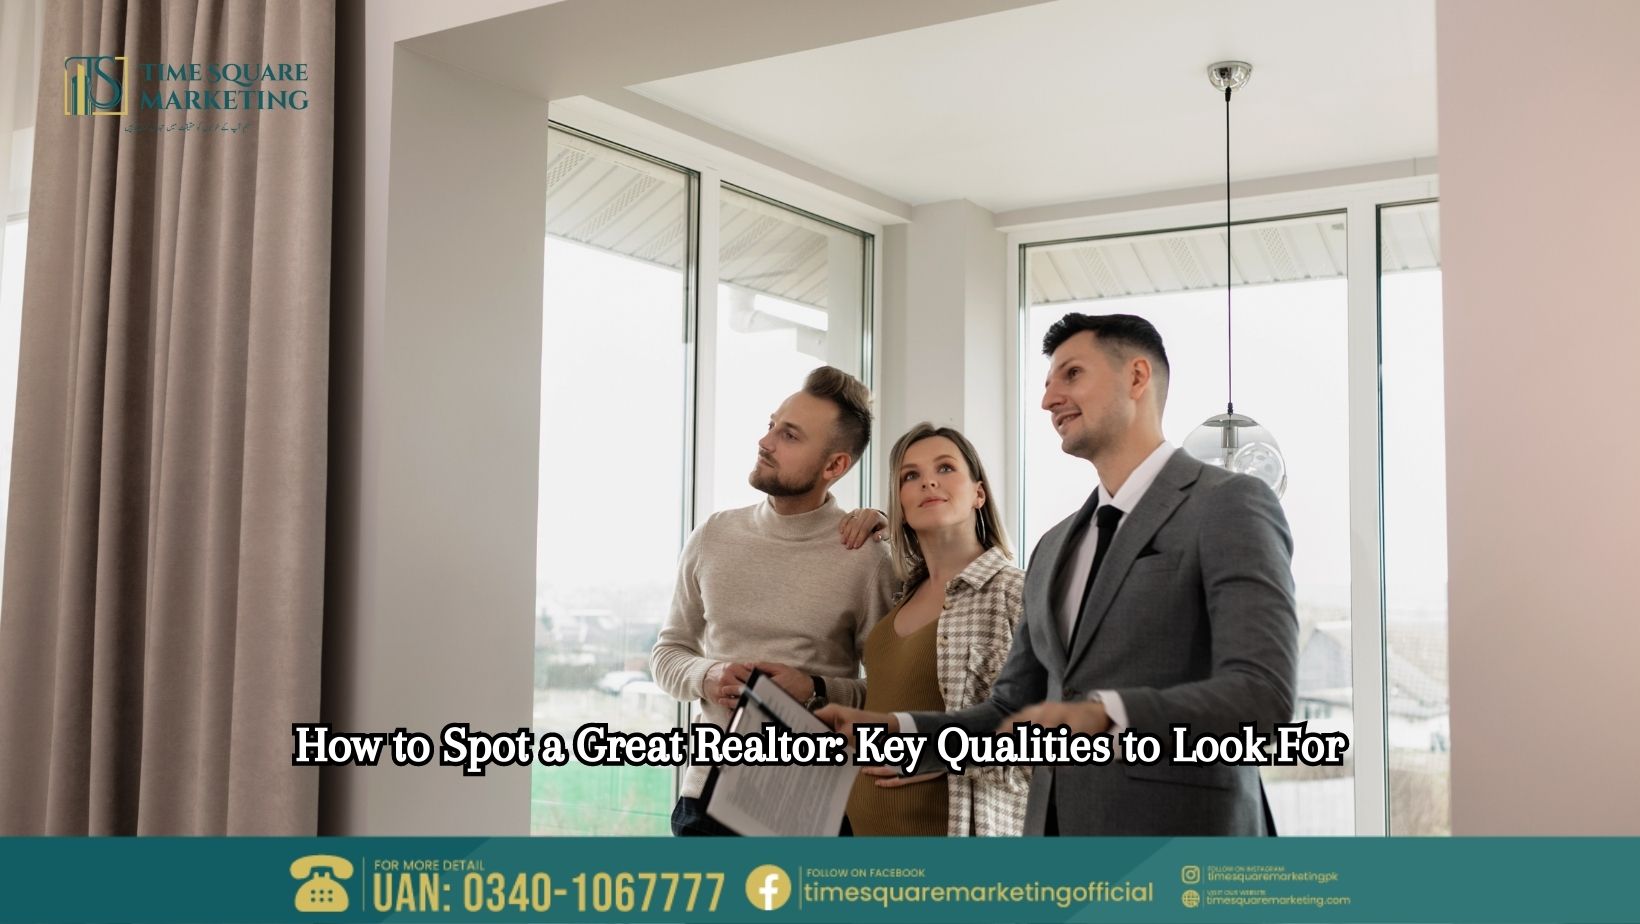 How to Spot a Great Realtor Key Qualities to Look For